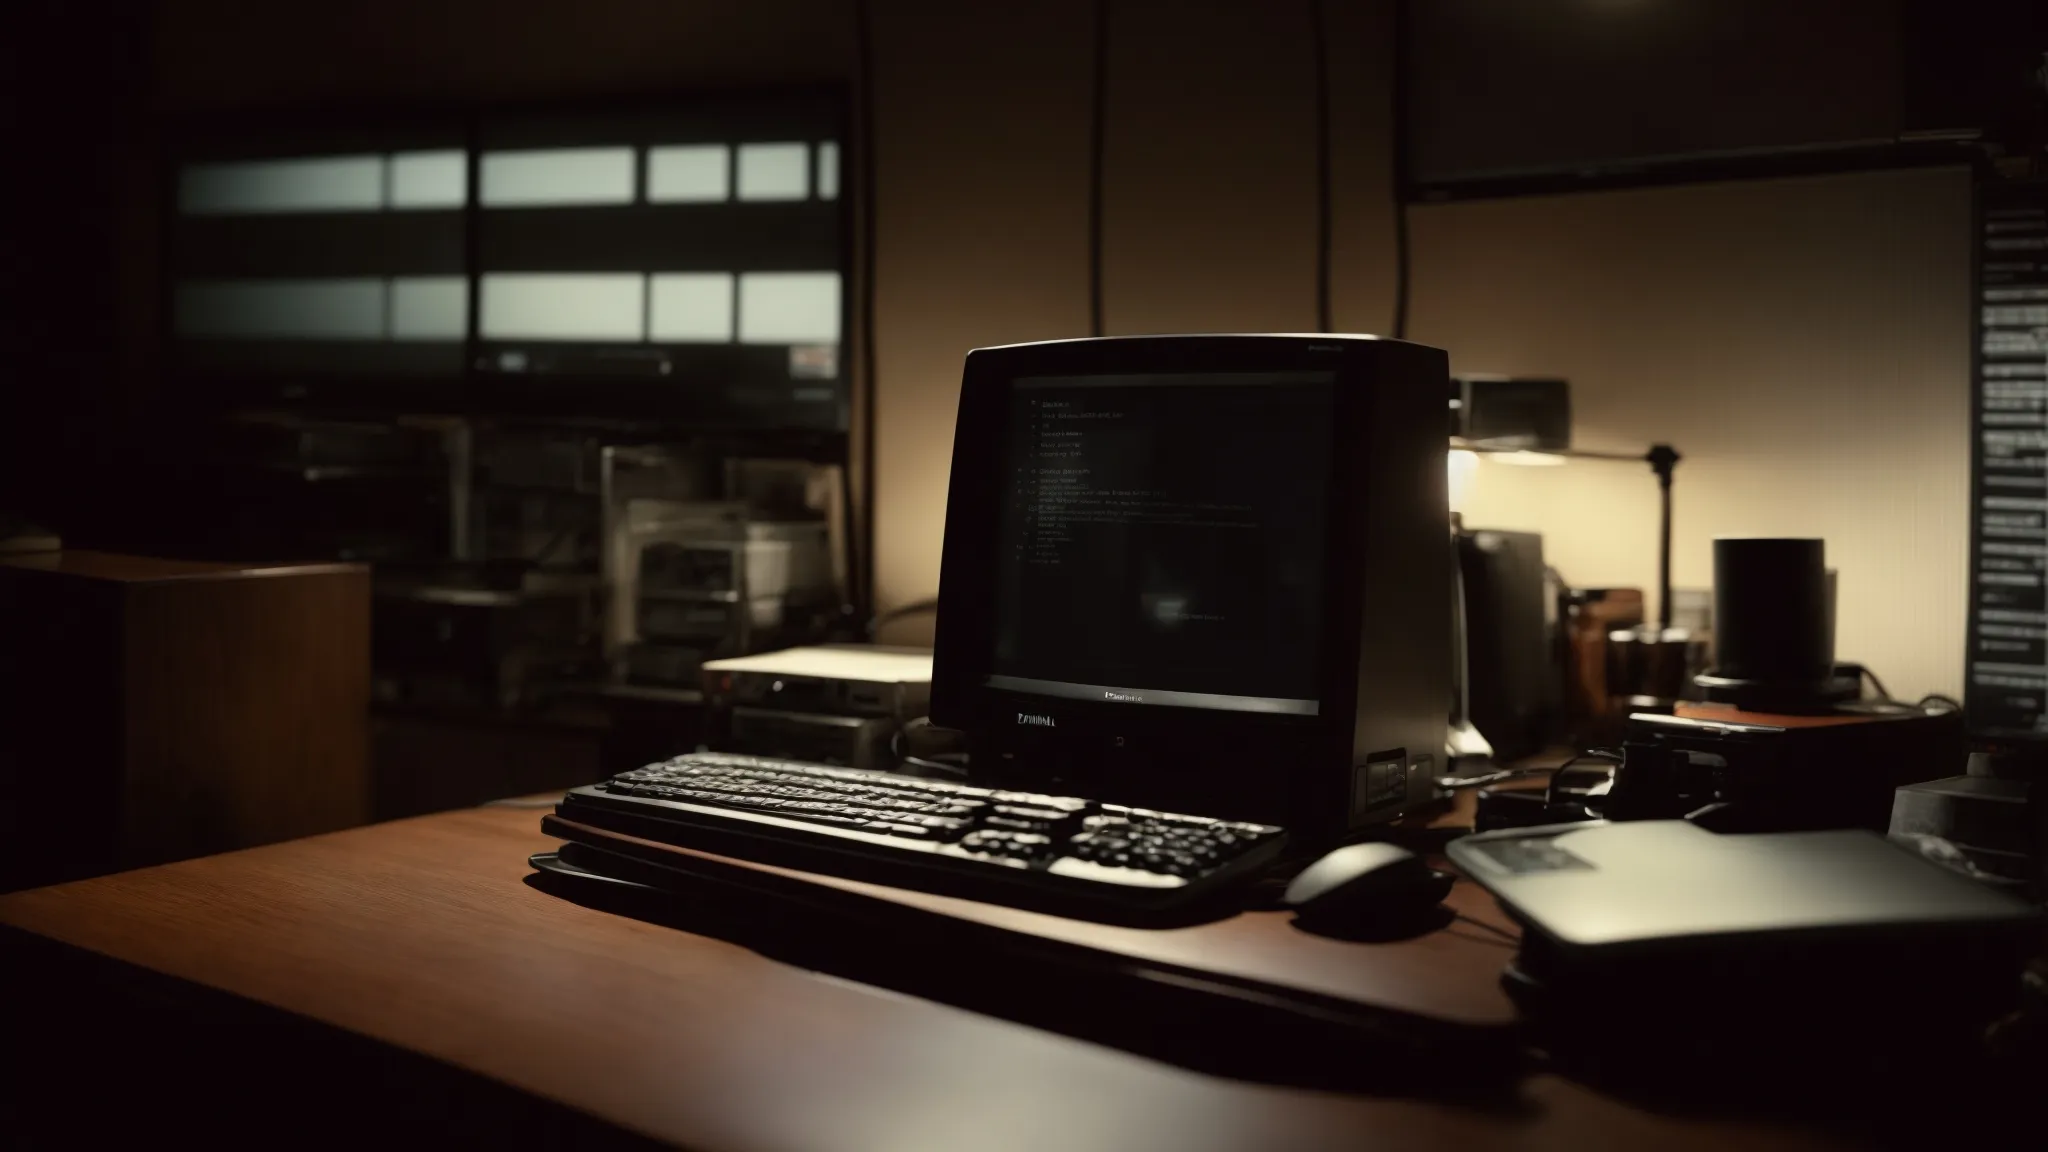 a dimly lit office with an outdated computer displaying a search engine home page.